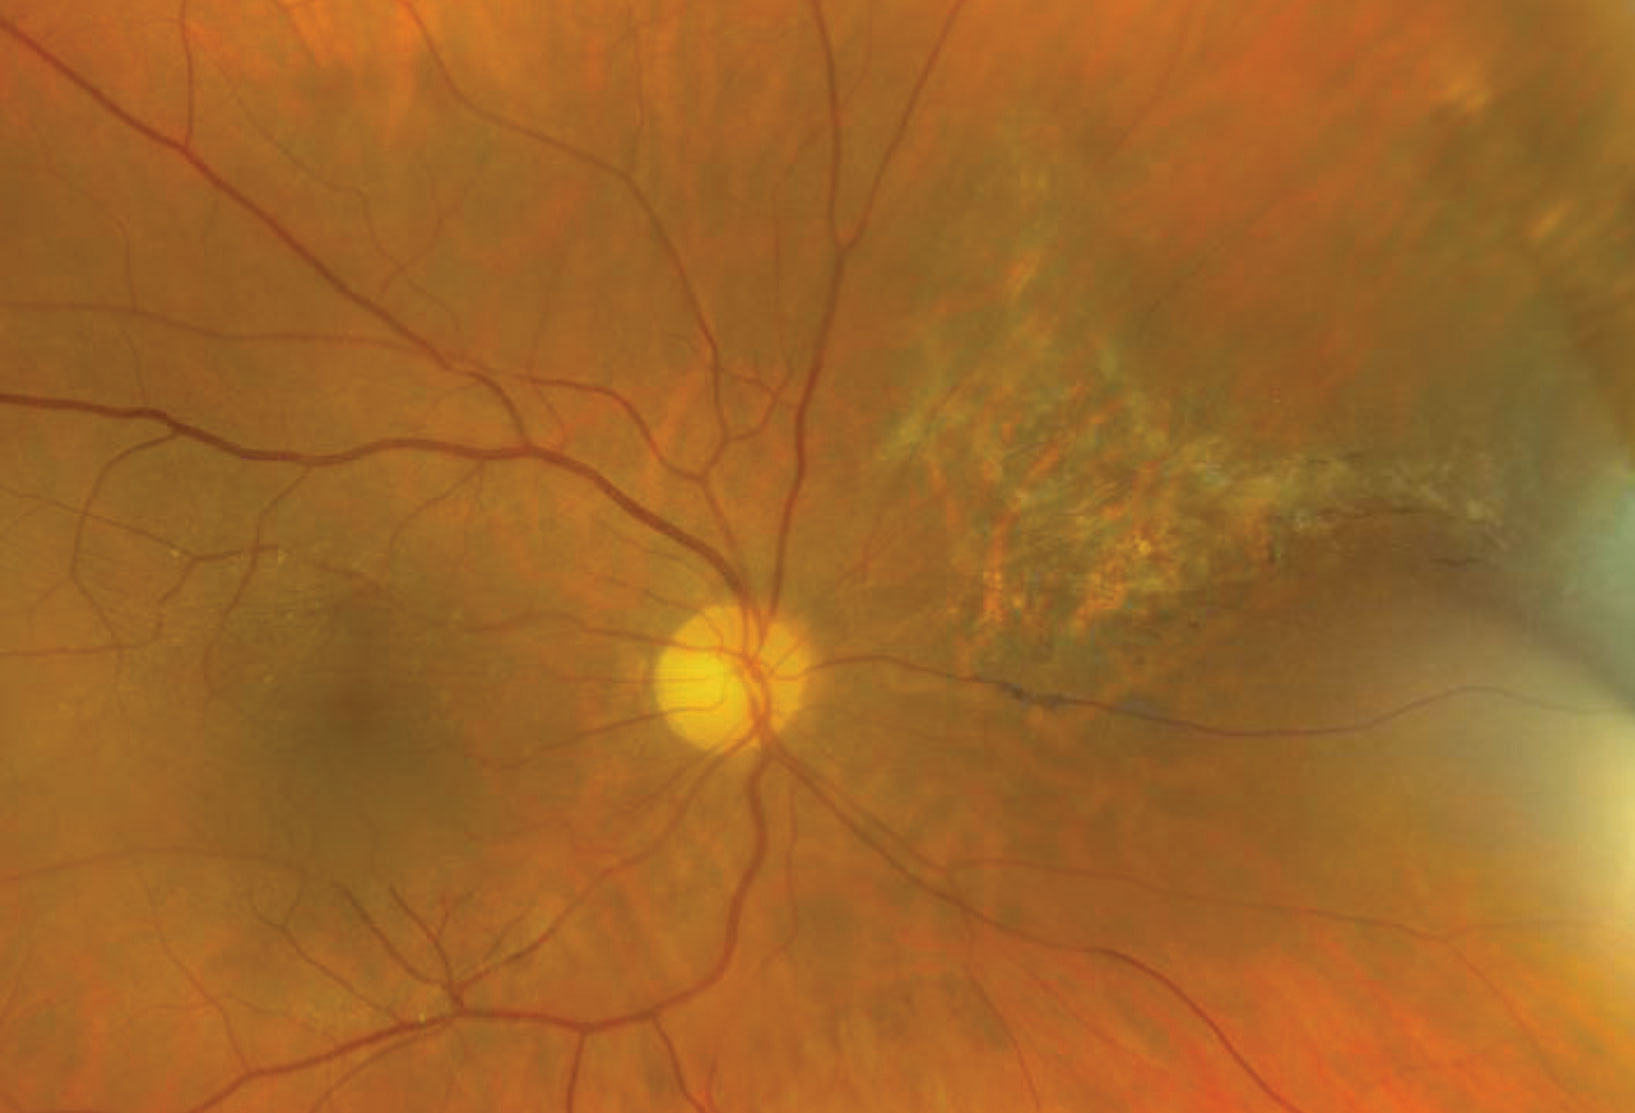 Here is our patient’s retina five years after initial diagnosis.